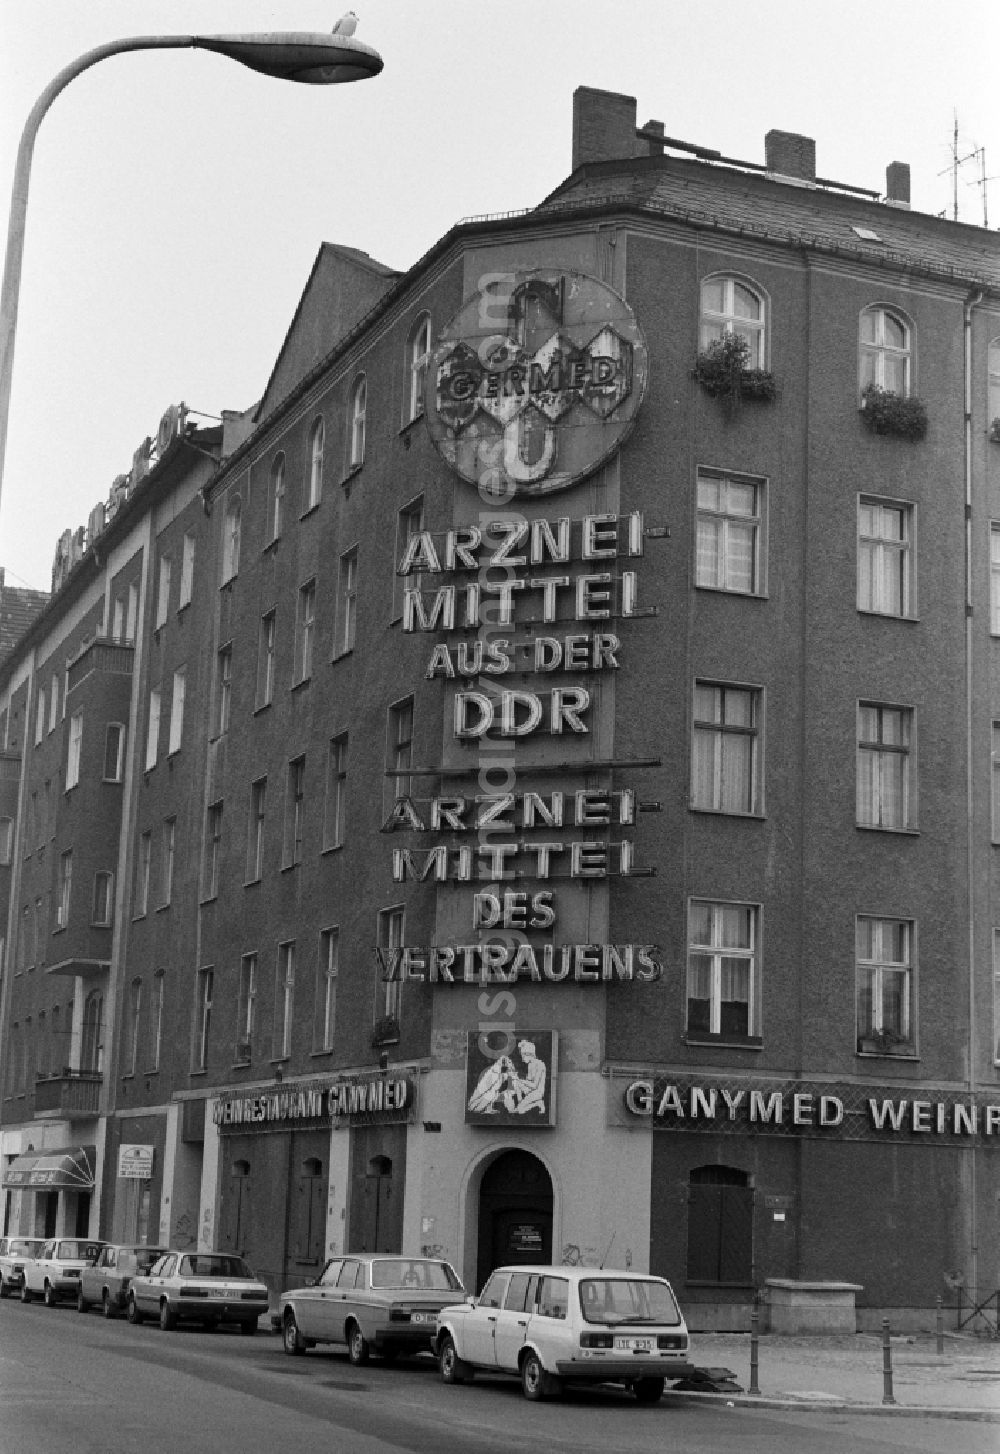 GDR image archive: Berlin - Advertisement for GERMED - drugs from the GDR is located above the closed wine restaurant Ganymed at Schiffbauerdamm in Berlin - Mitte, the former capital of the GDR, German Democratic Republic